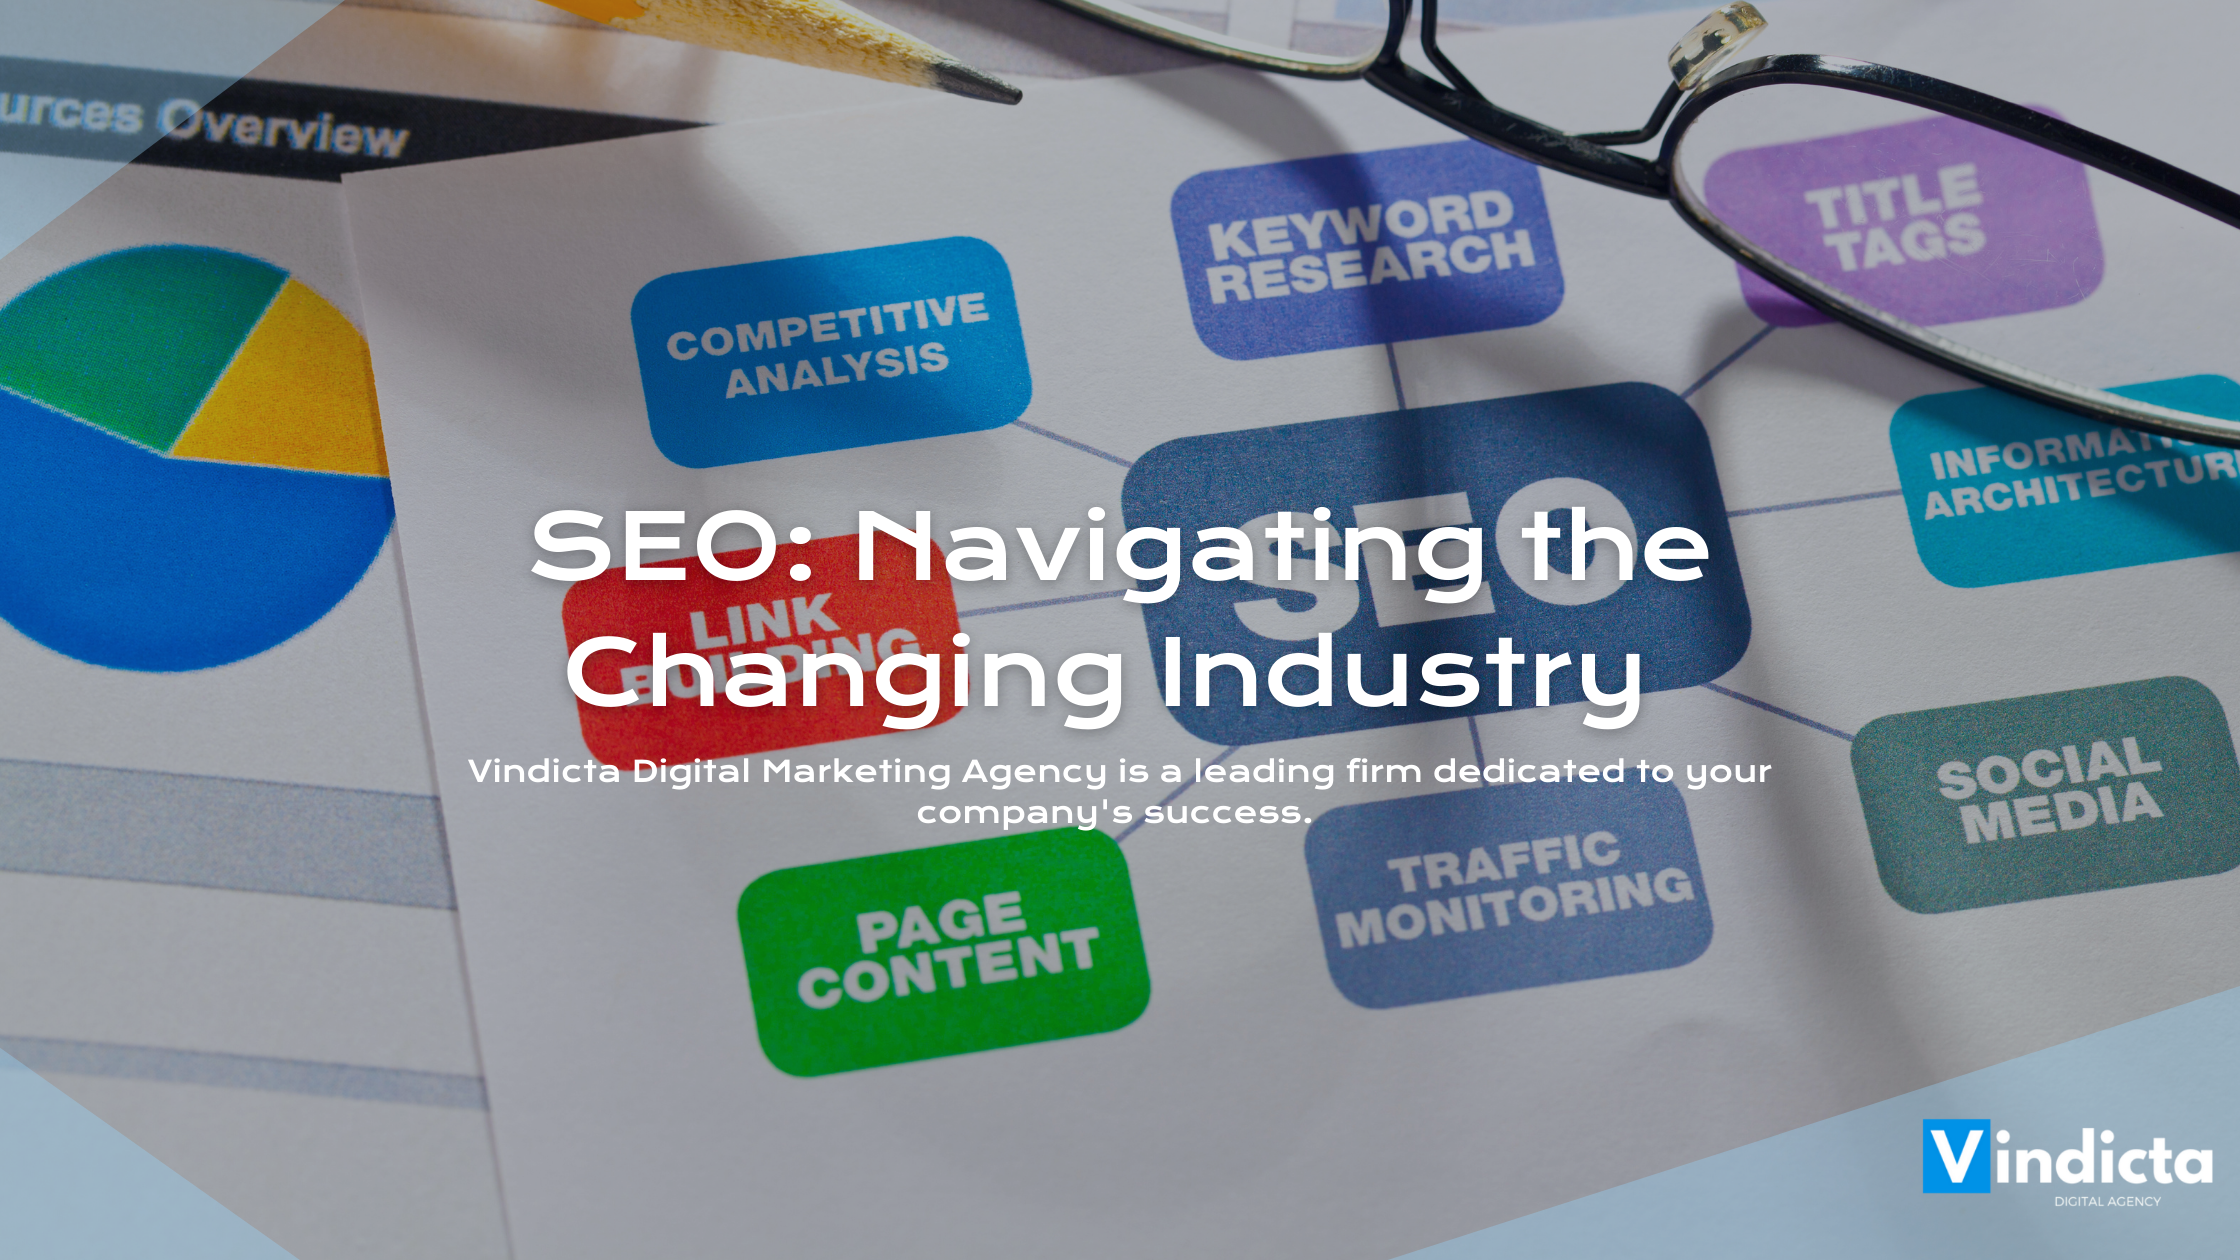 SEO: Navigating the Changing Industry